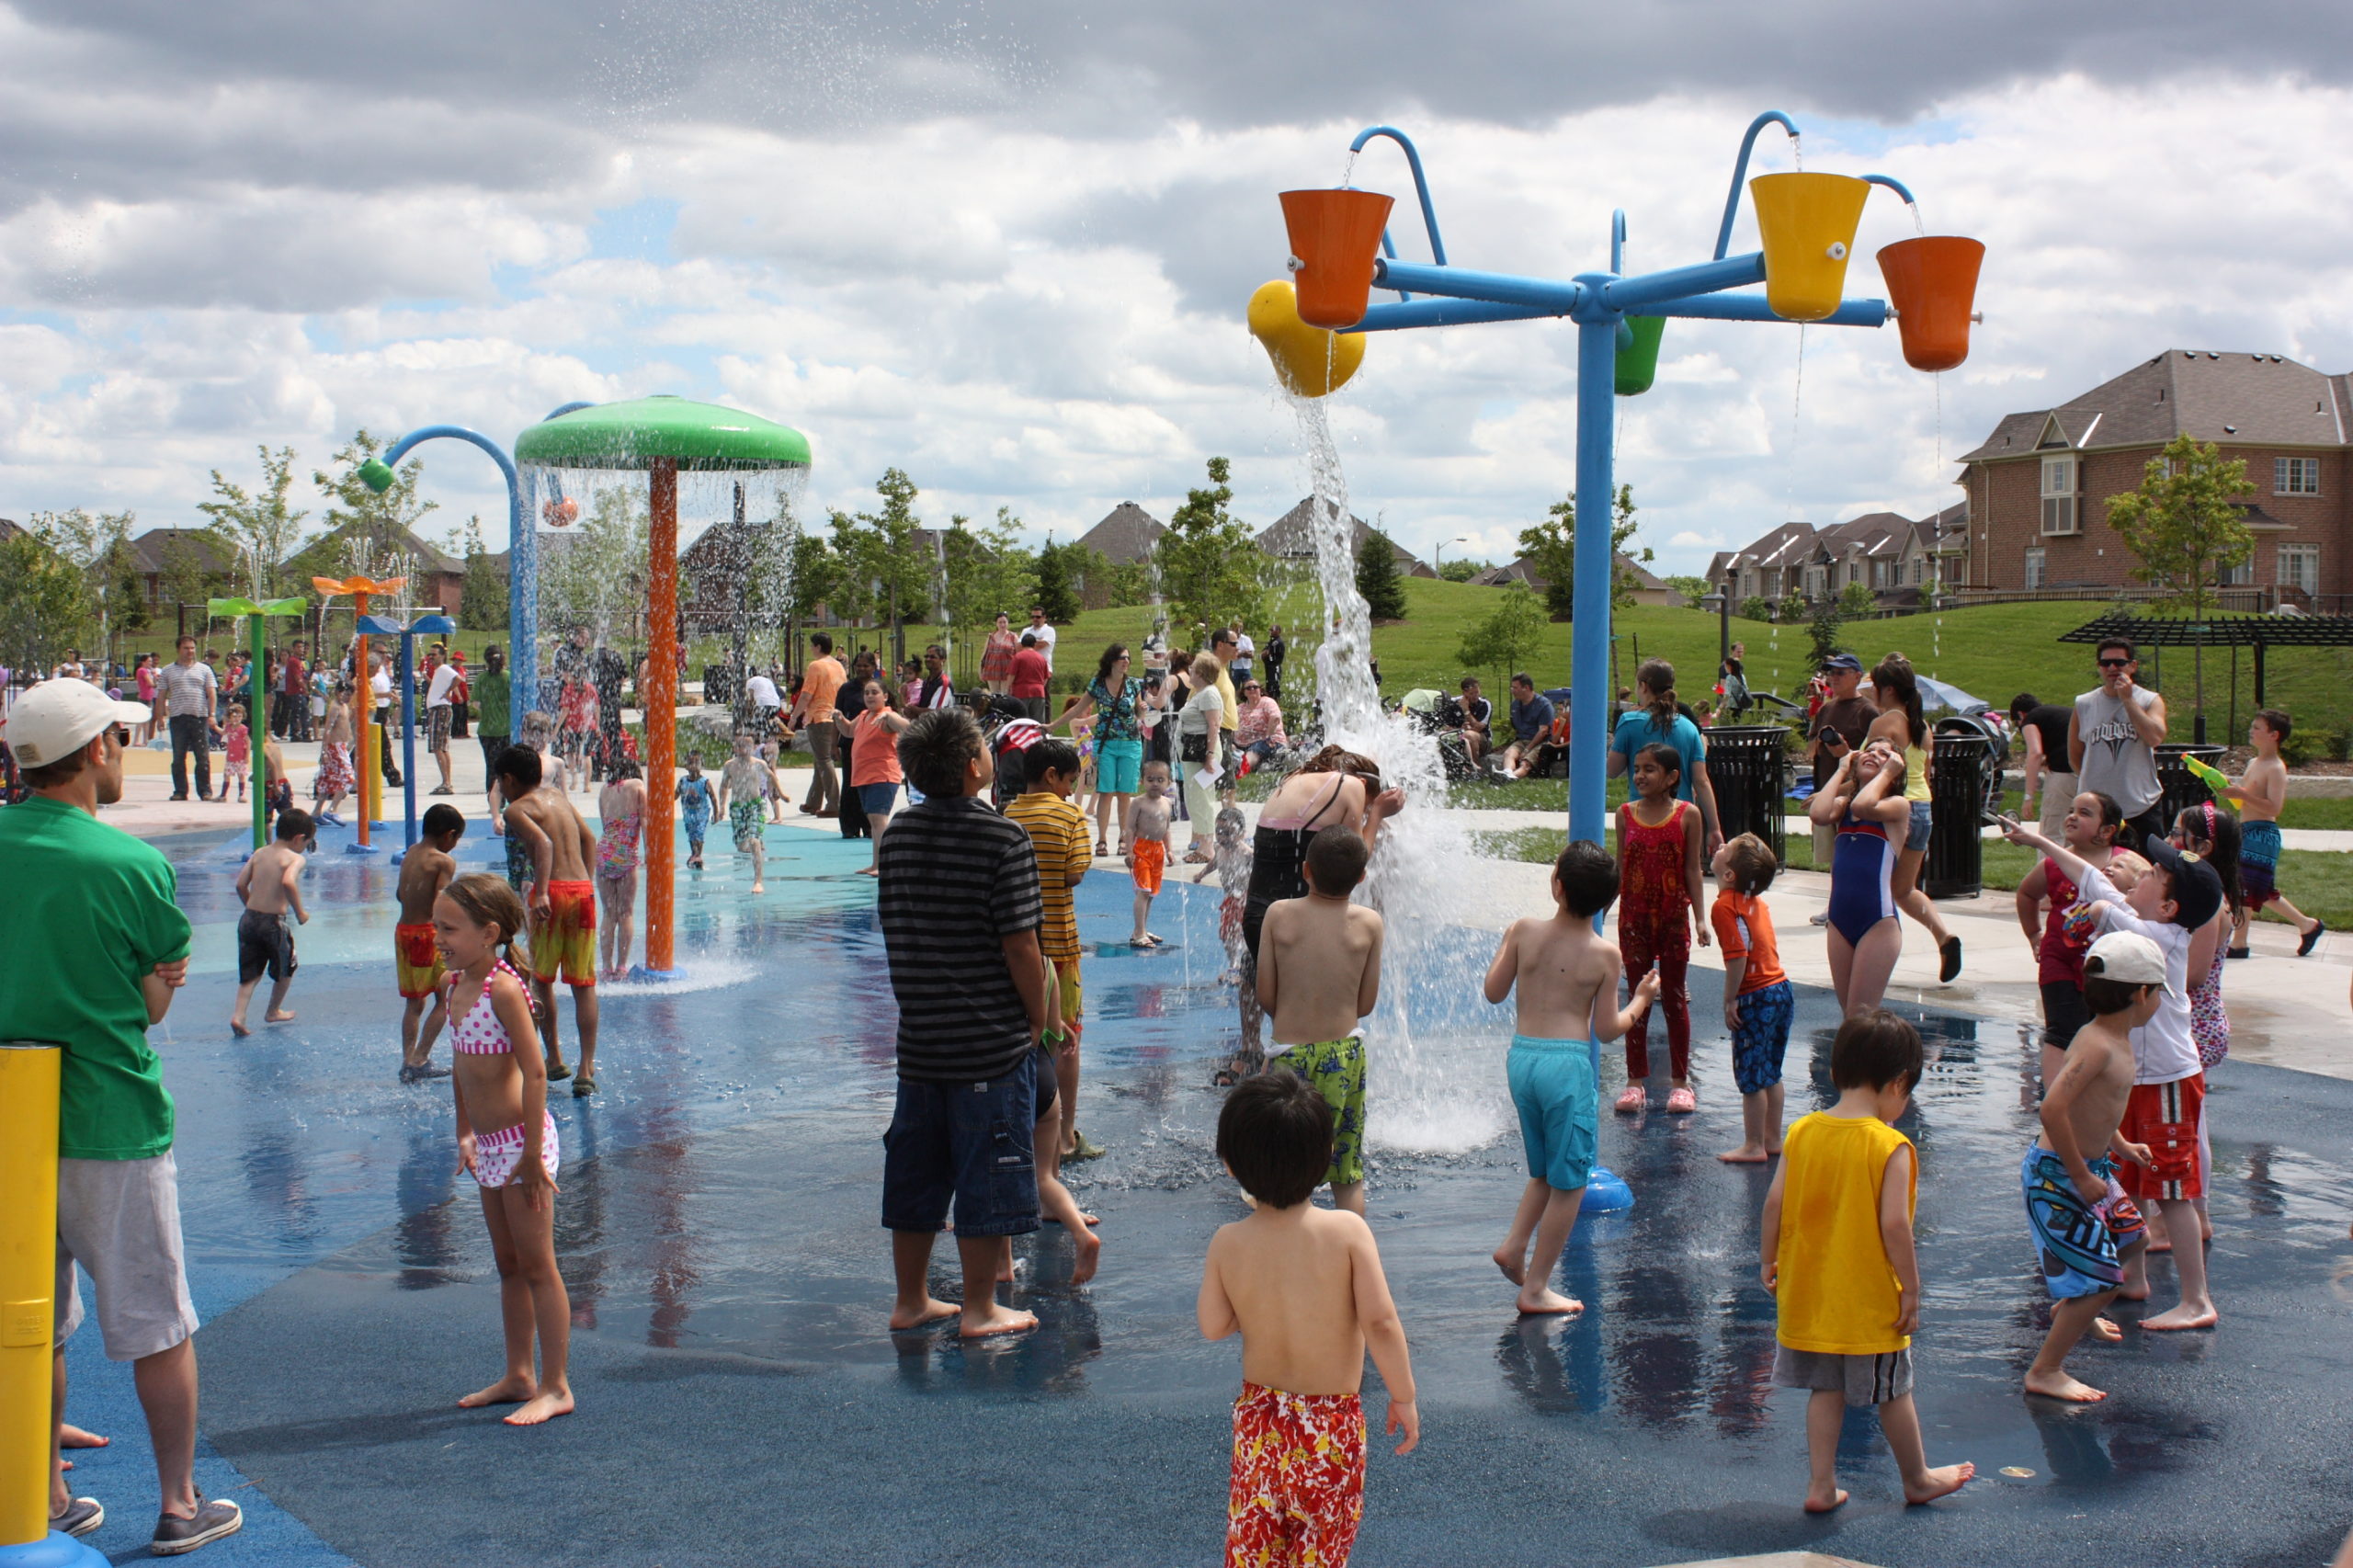 Large water park and splash pad with lots of children playing in it.